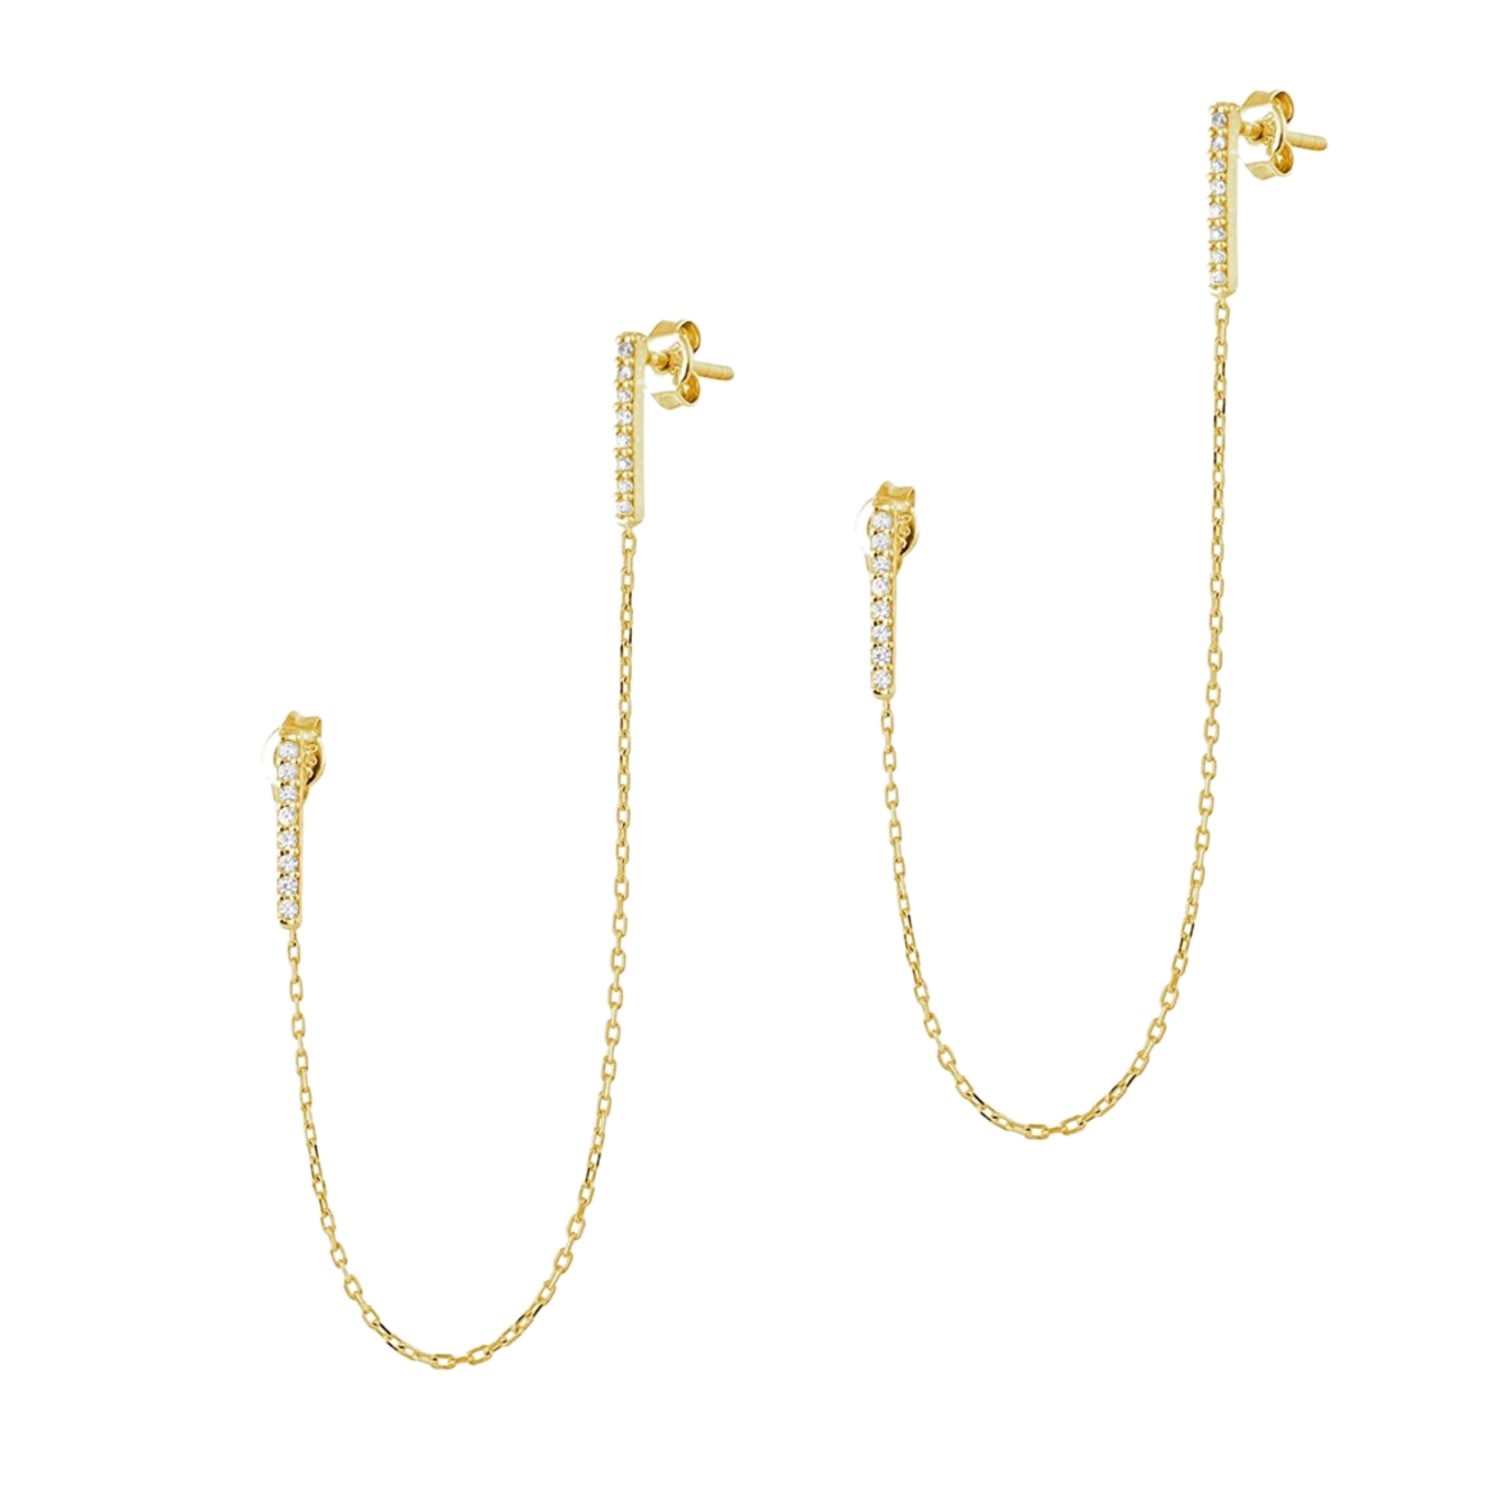 Spero London Women's Chained Bar Chain Earring Sterling Silver - Pair - Gold